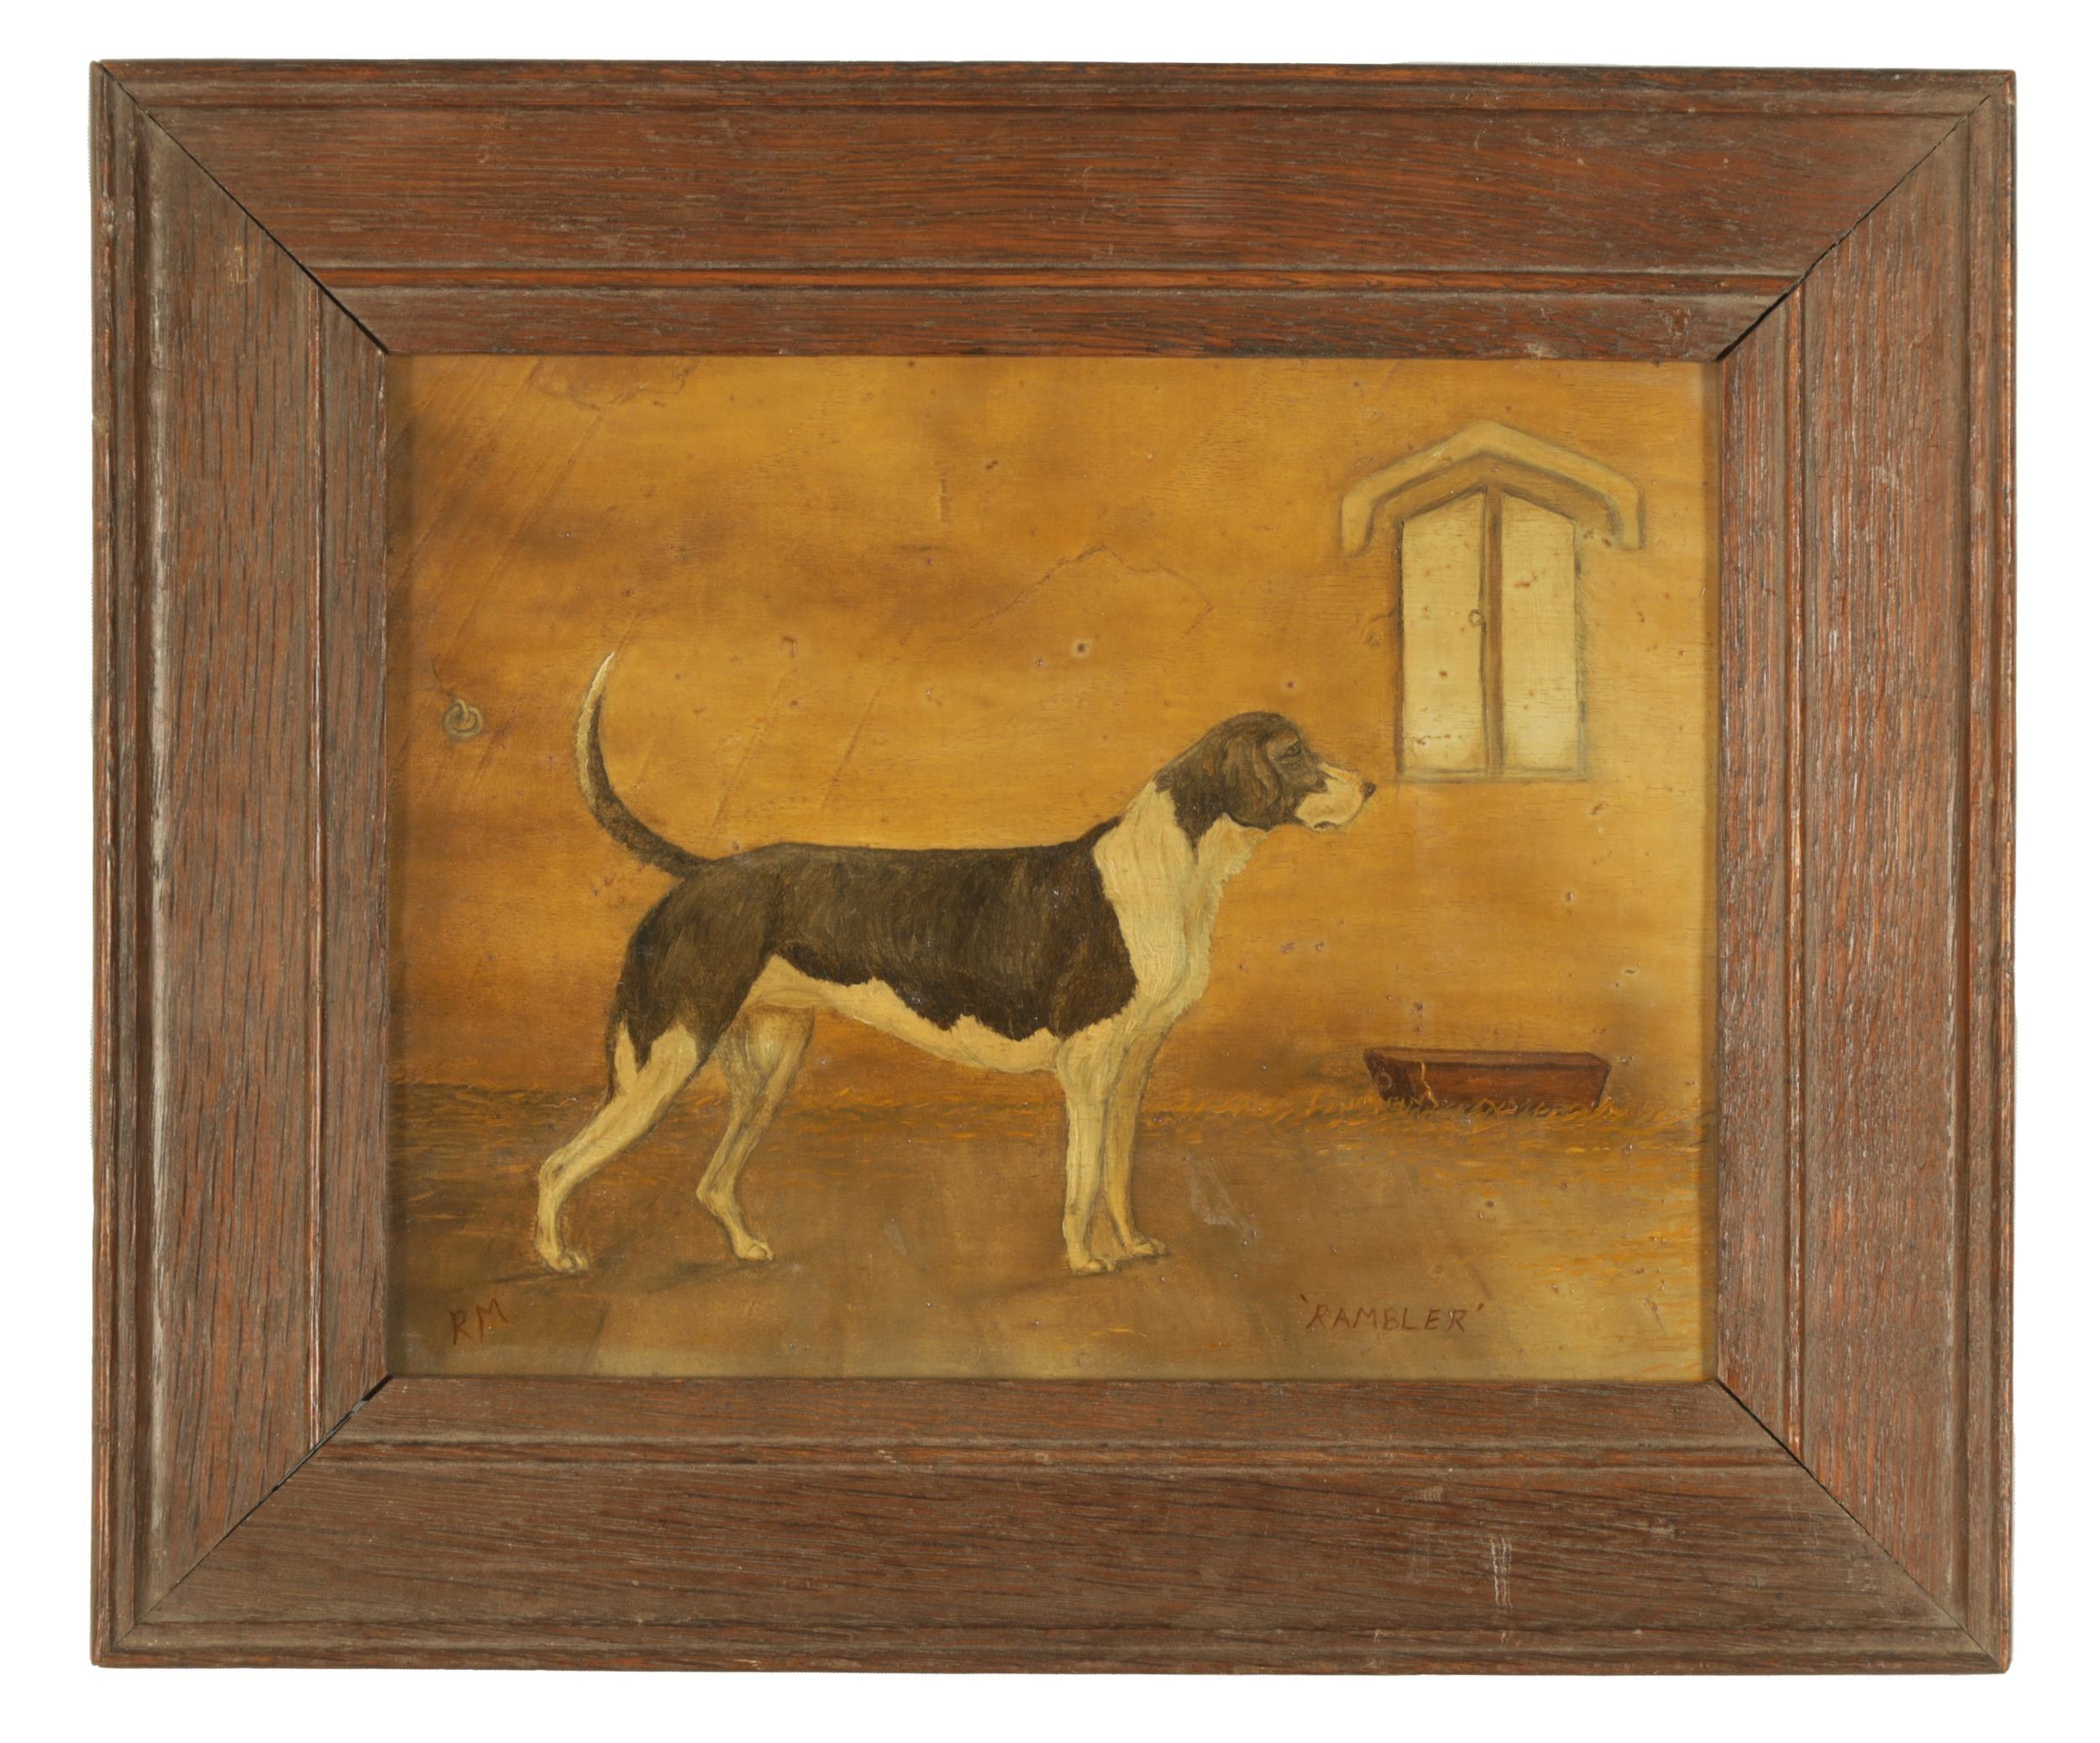 Antique British Animal Painting - Antique English Primitive Dog Oil Painting - Hound in a Stable Interior, signed